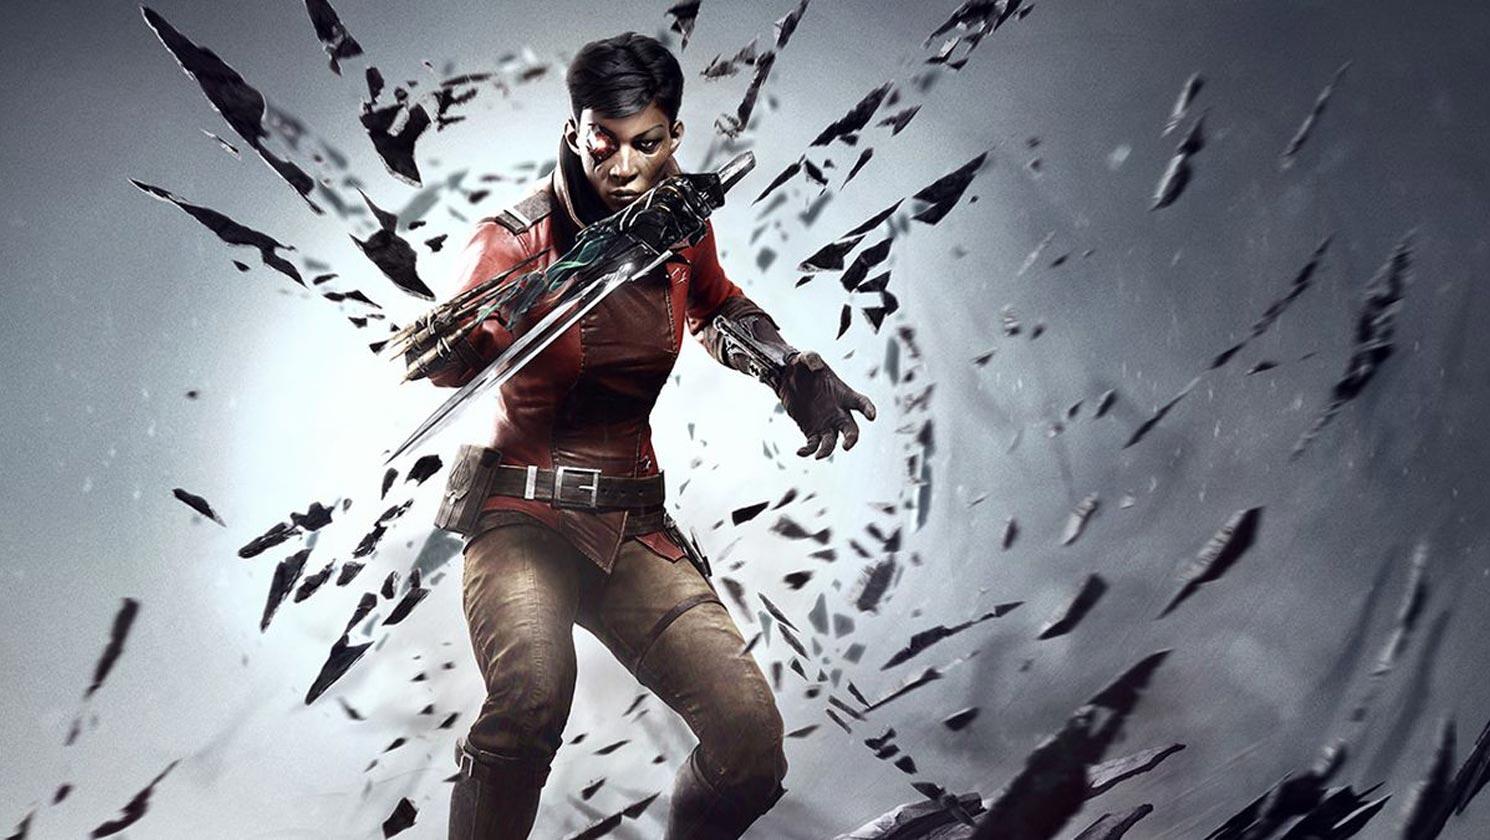 Dishonored: Death of the Outsider Gratis su Epic Games